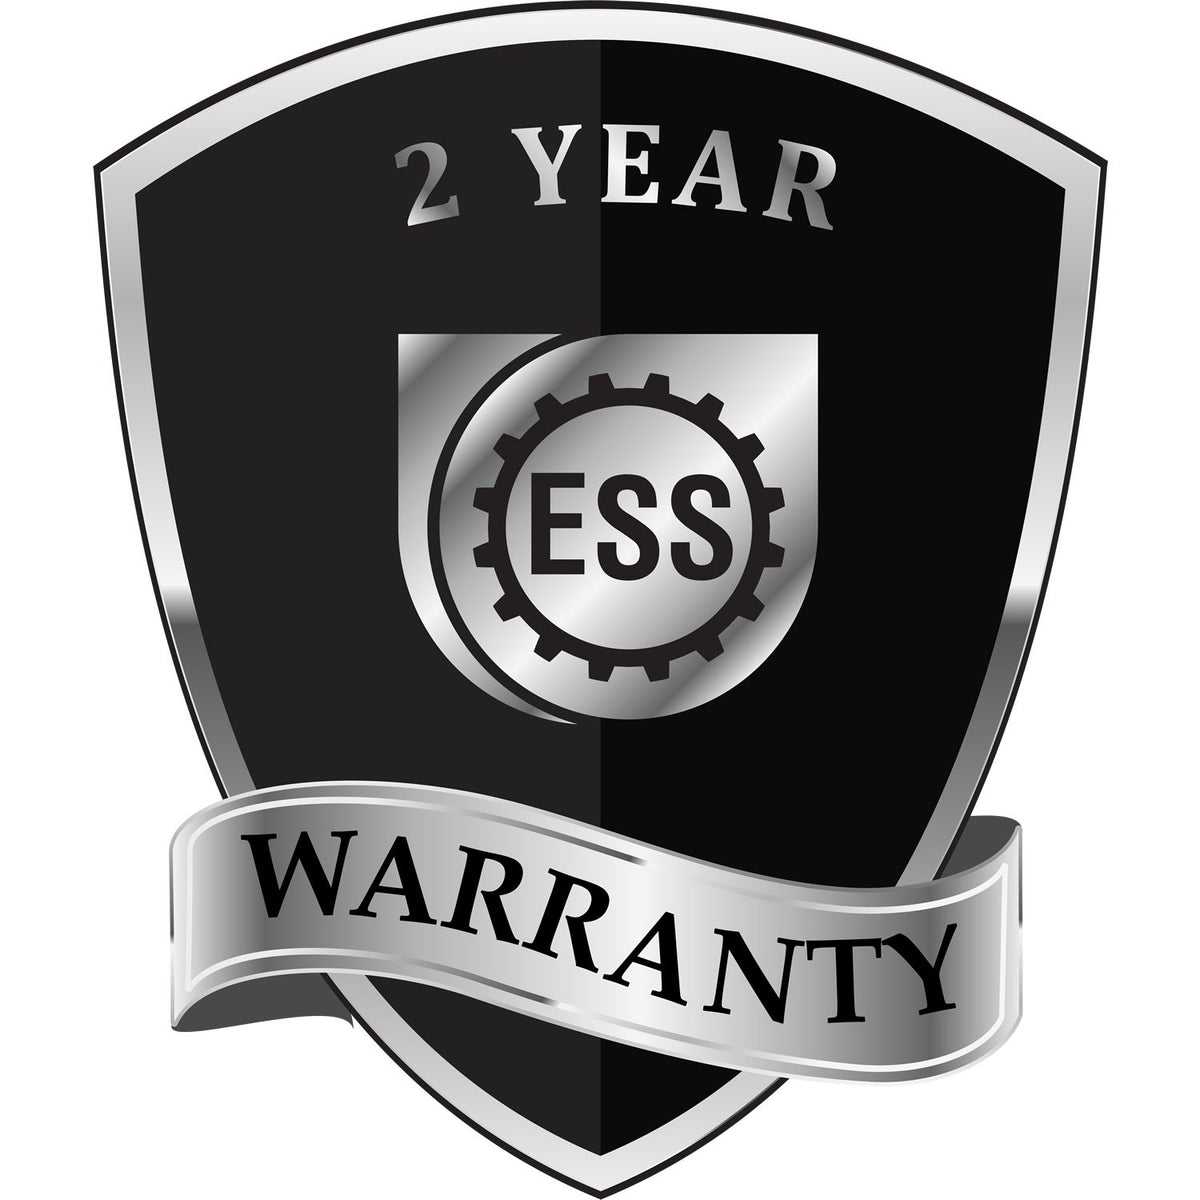 A black and silver badge or emblem showing warranty information for the Hybrid Georgia Engineer Seal